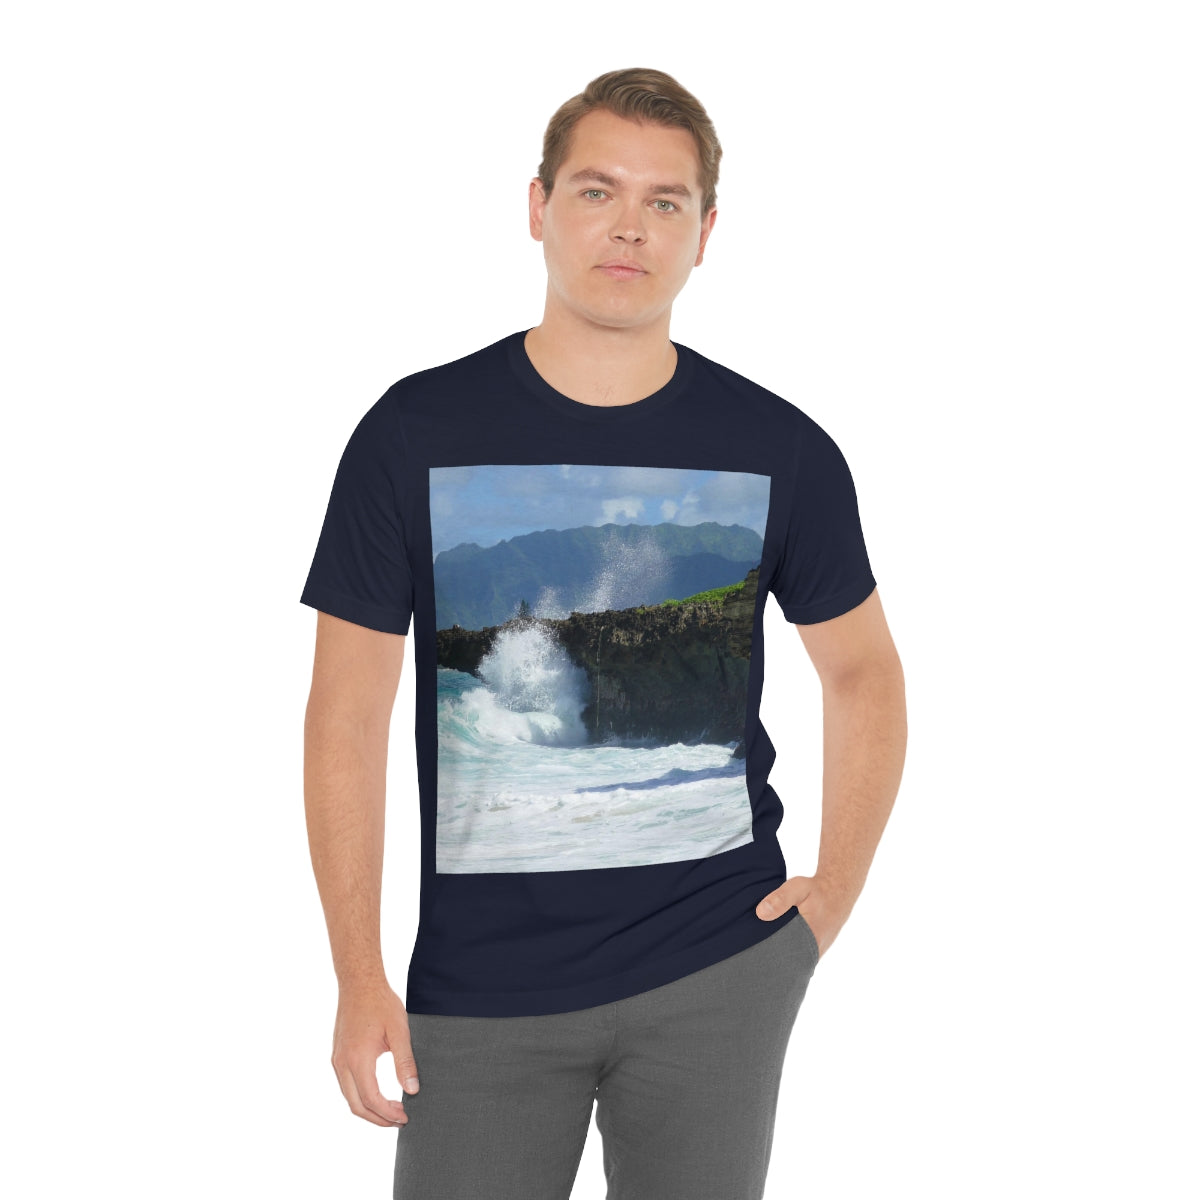 Rockin Surfer's Rope - Unisex Jersey Short Sleeve T-Shirt - Fry1Productions